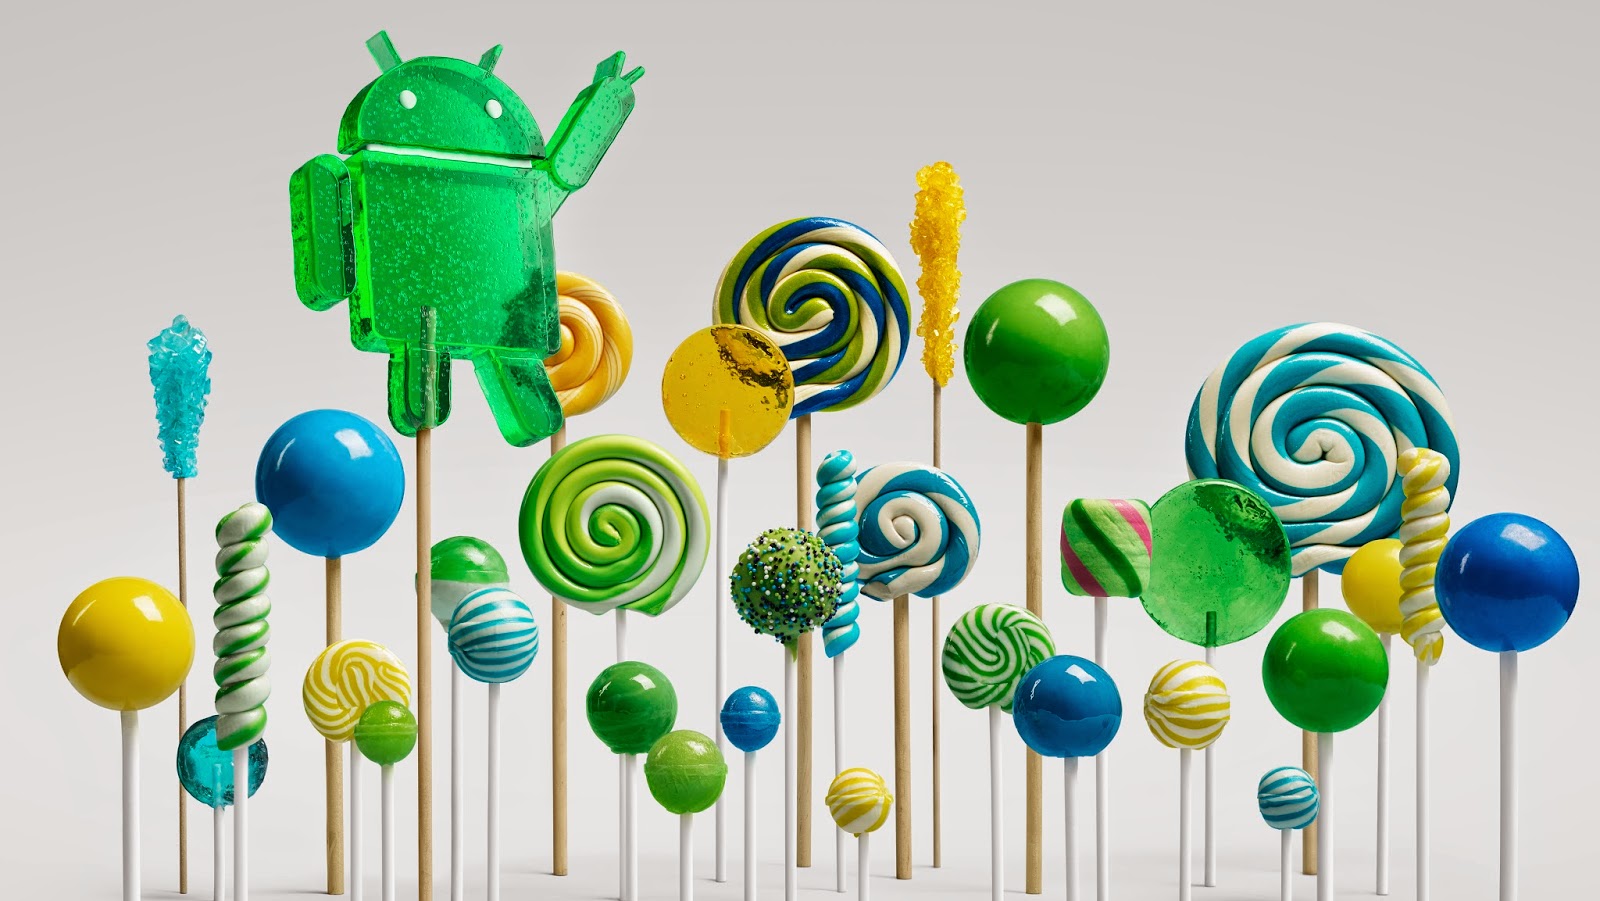 Official Android 5 0 Lollipop Sdk Now Available For Download 9to5google